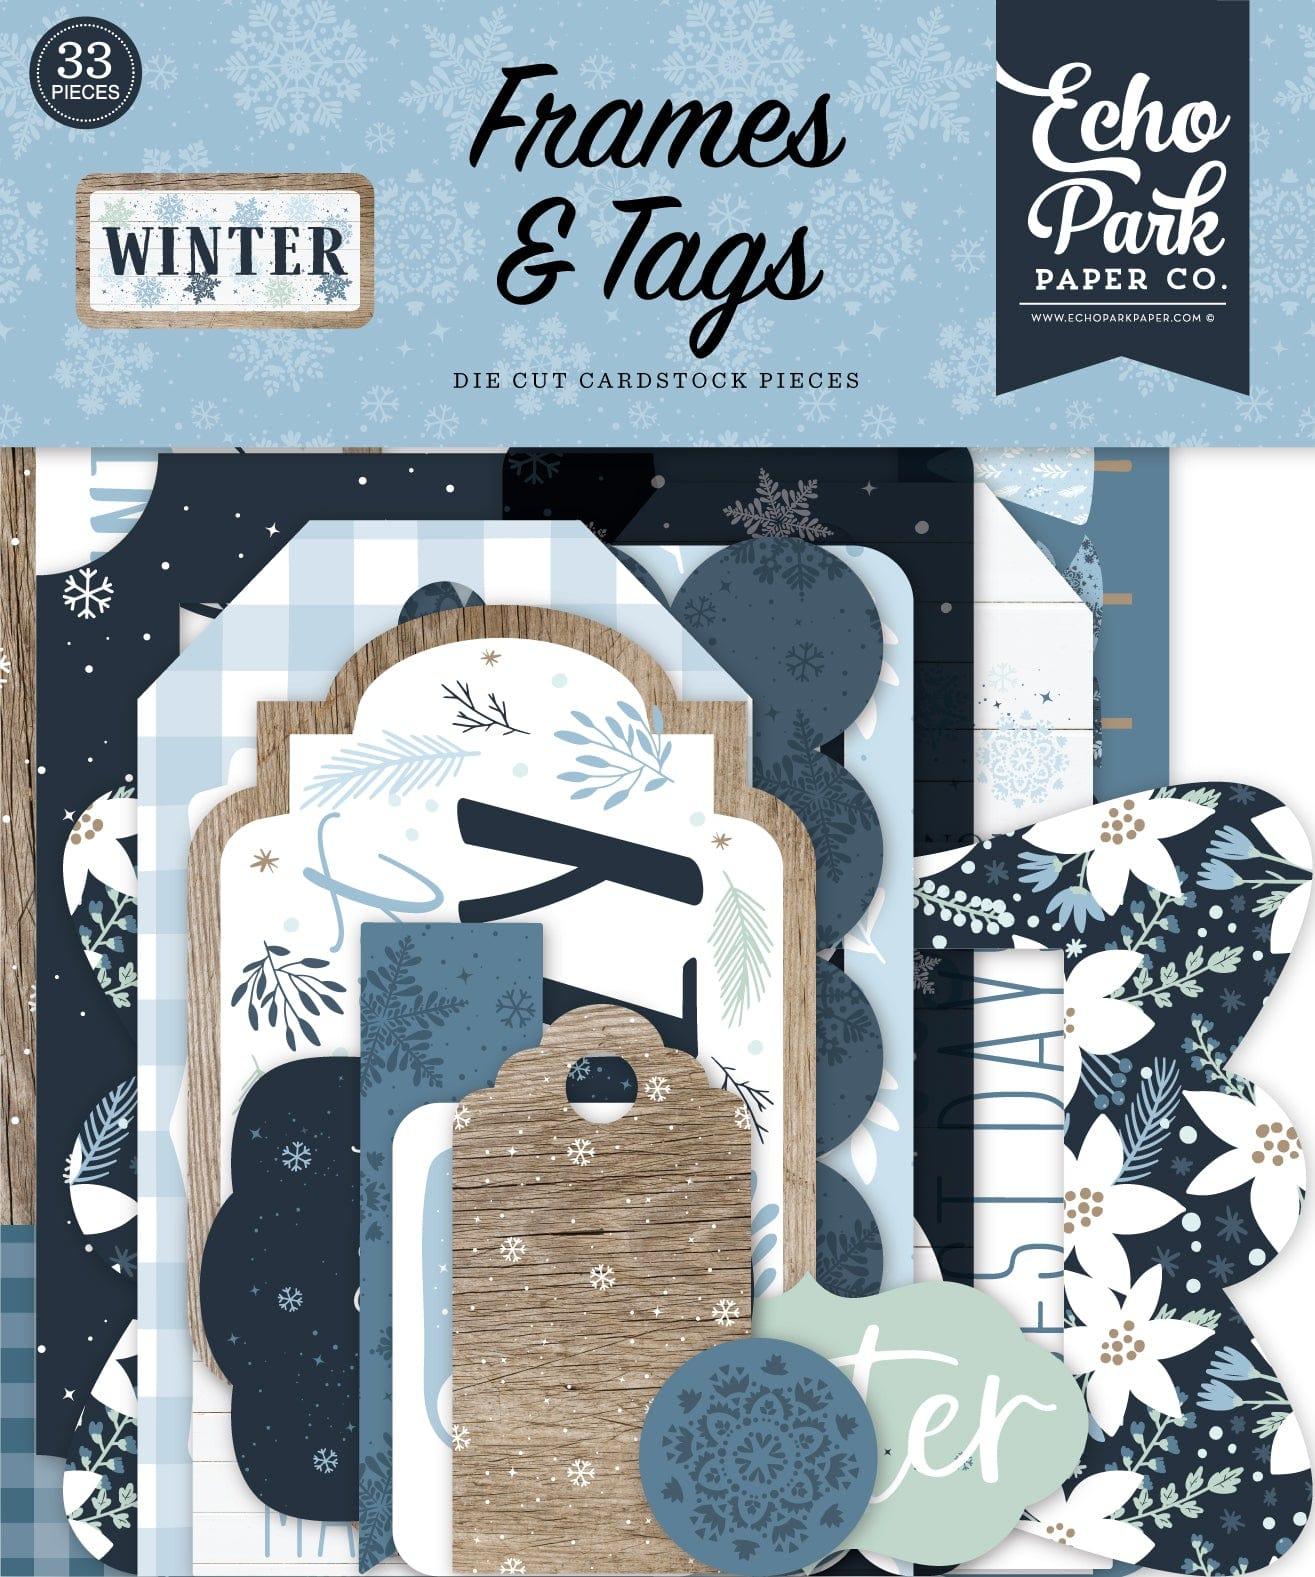 Winter Collection 5 x 5 Scrapbook Tags & Frames Die Cuts by Echo Park Paper - Scrapbook Supply Companies